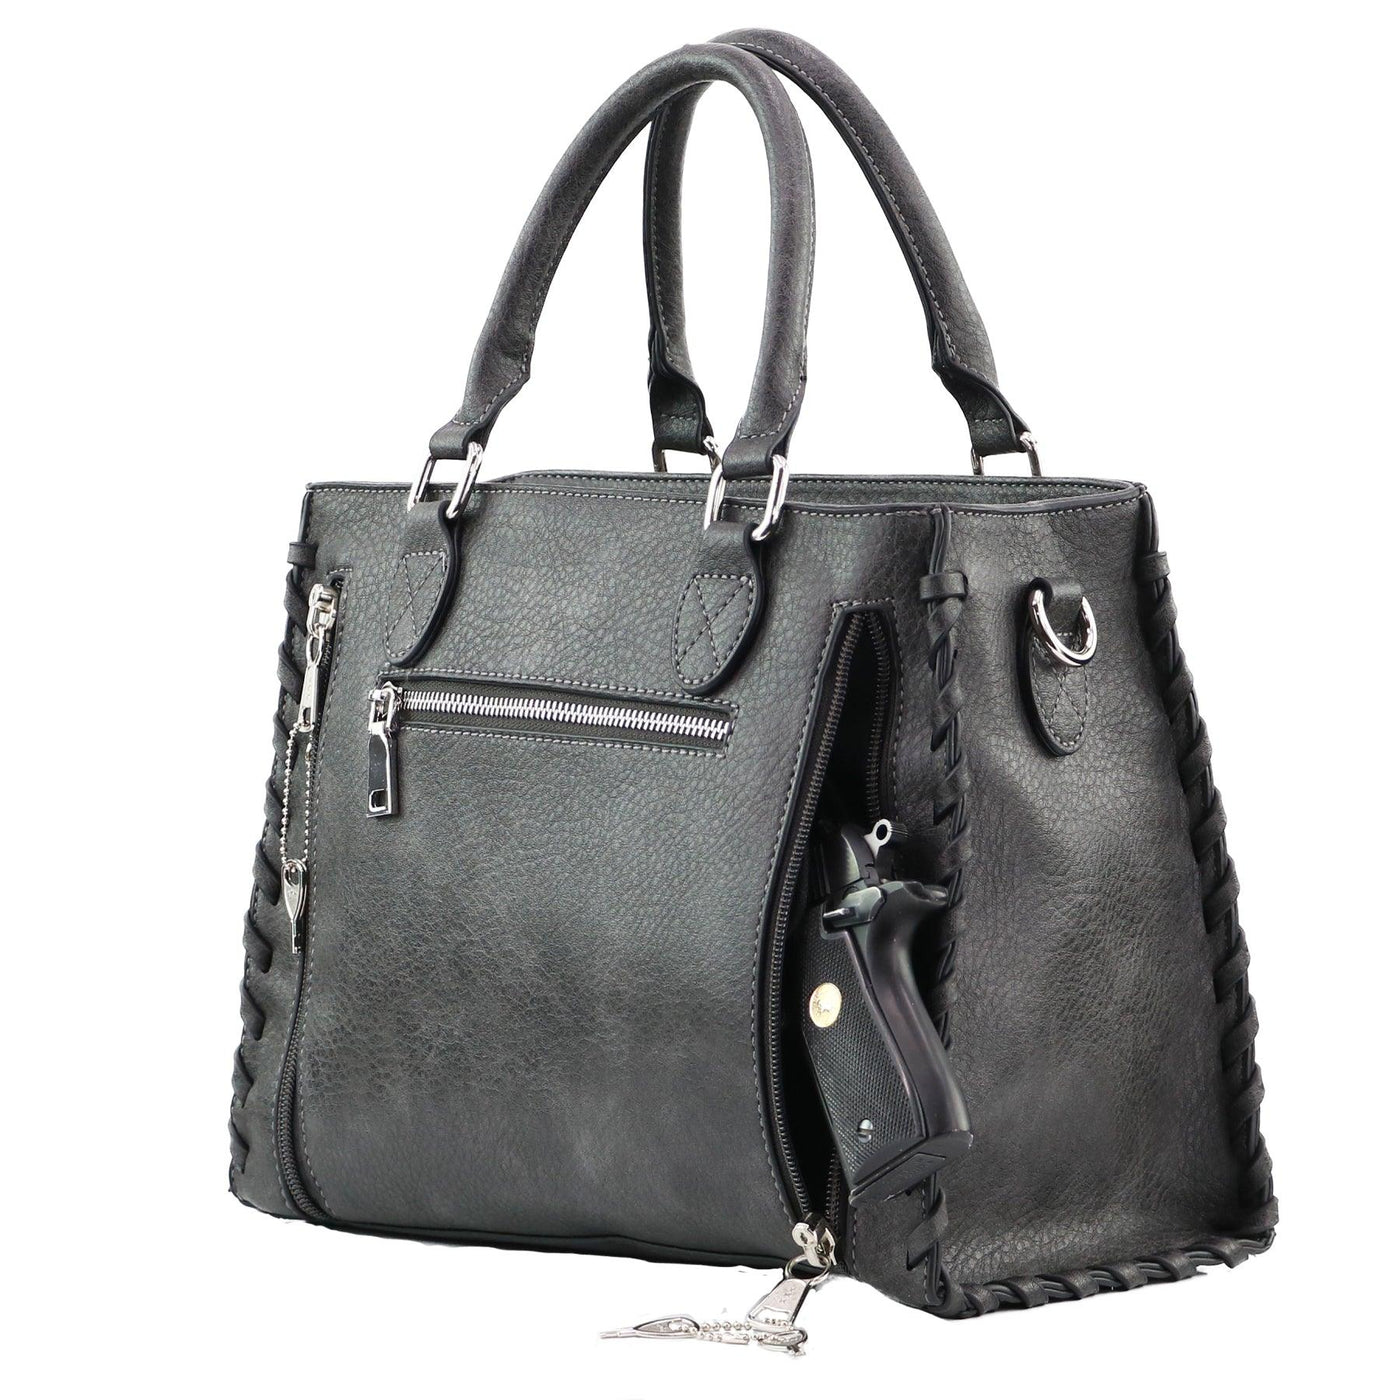 Concealed Carry Ann Satchel by Lady Conceal - Designer Luxury Conceal Carry Handbag -  YKK Locking Zippers and Universal Handbag Gun and Pistol Bag -  crossbody Handbag for concealed gun carry - concealed carry Handbag Ann Satchel gun Handbag - concealed carry gun Handbag